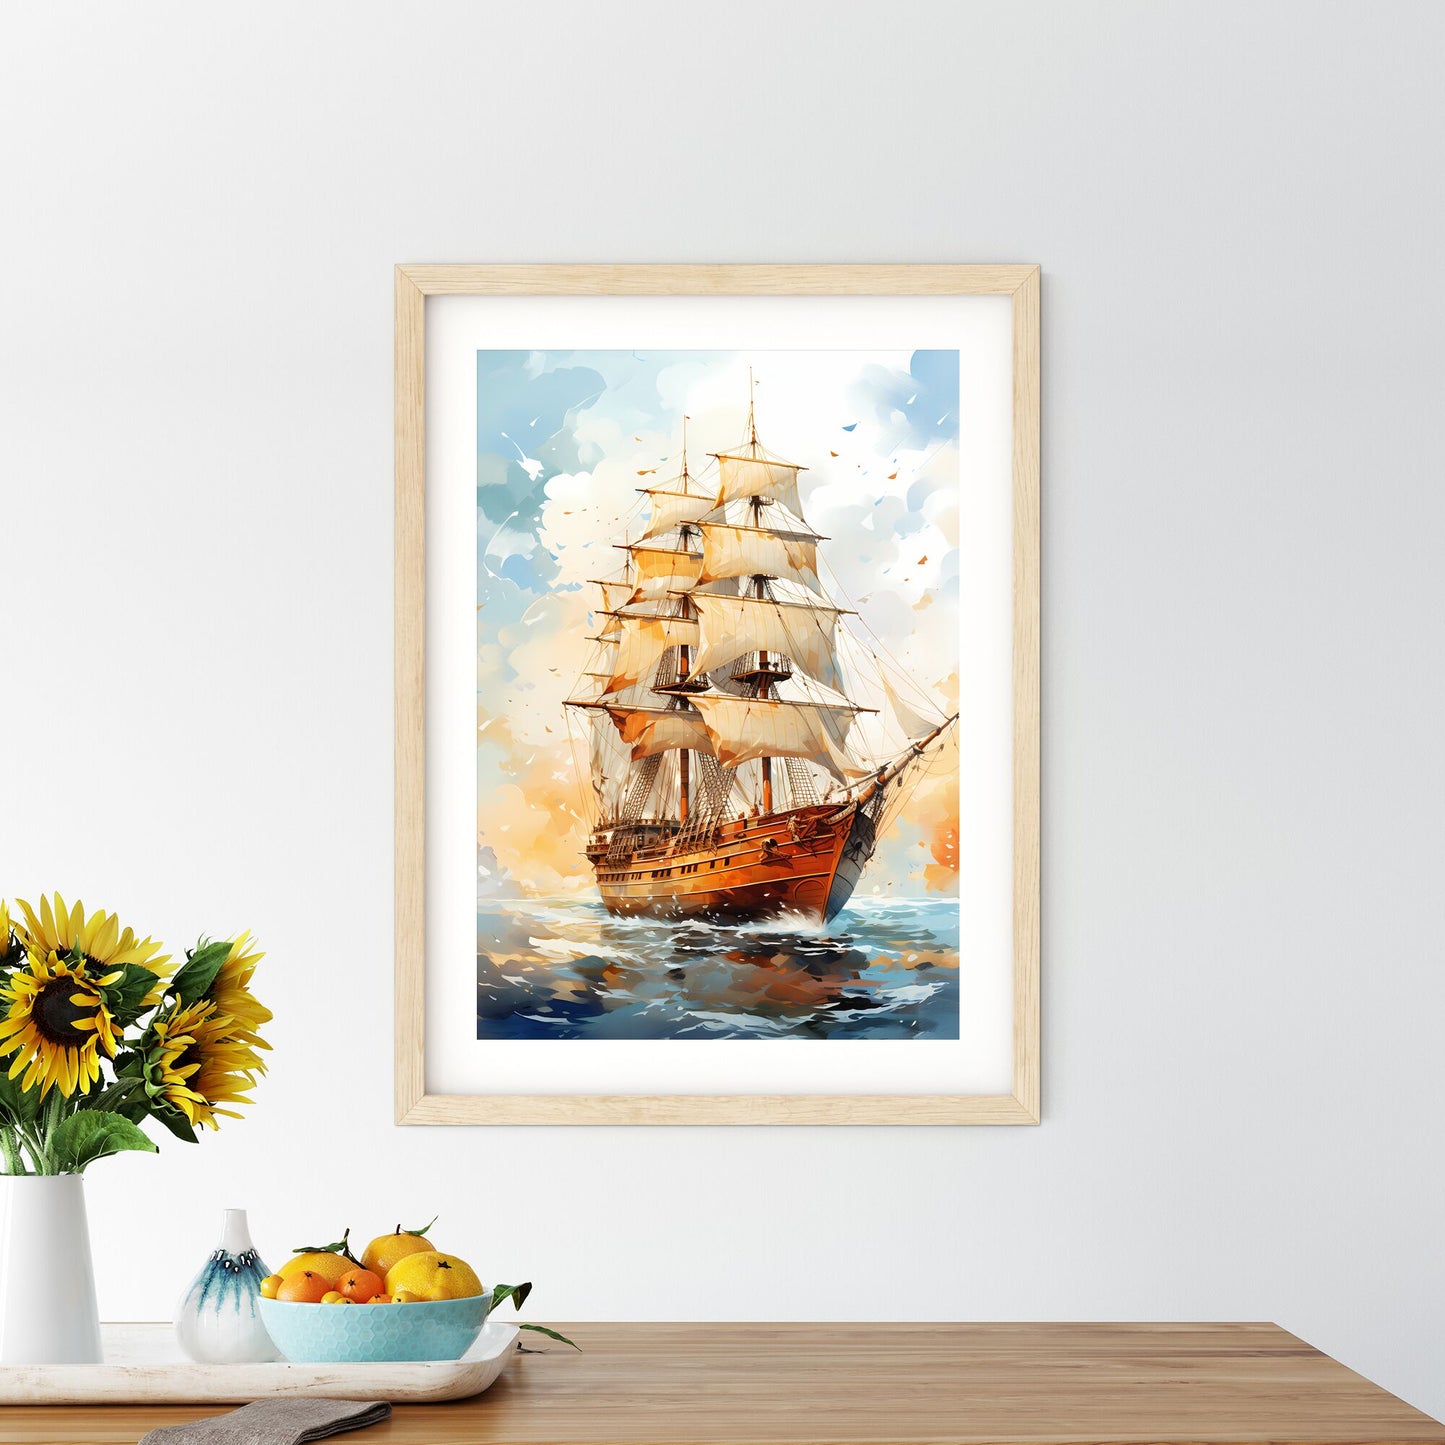 Exploration - A Painting Of A Ship With White Sails Default Title